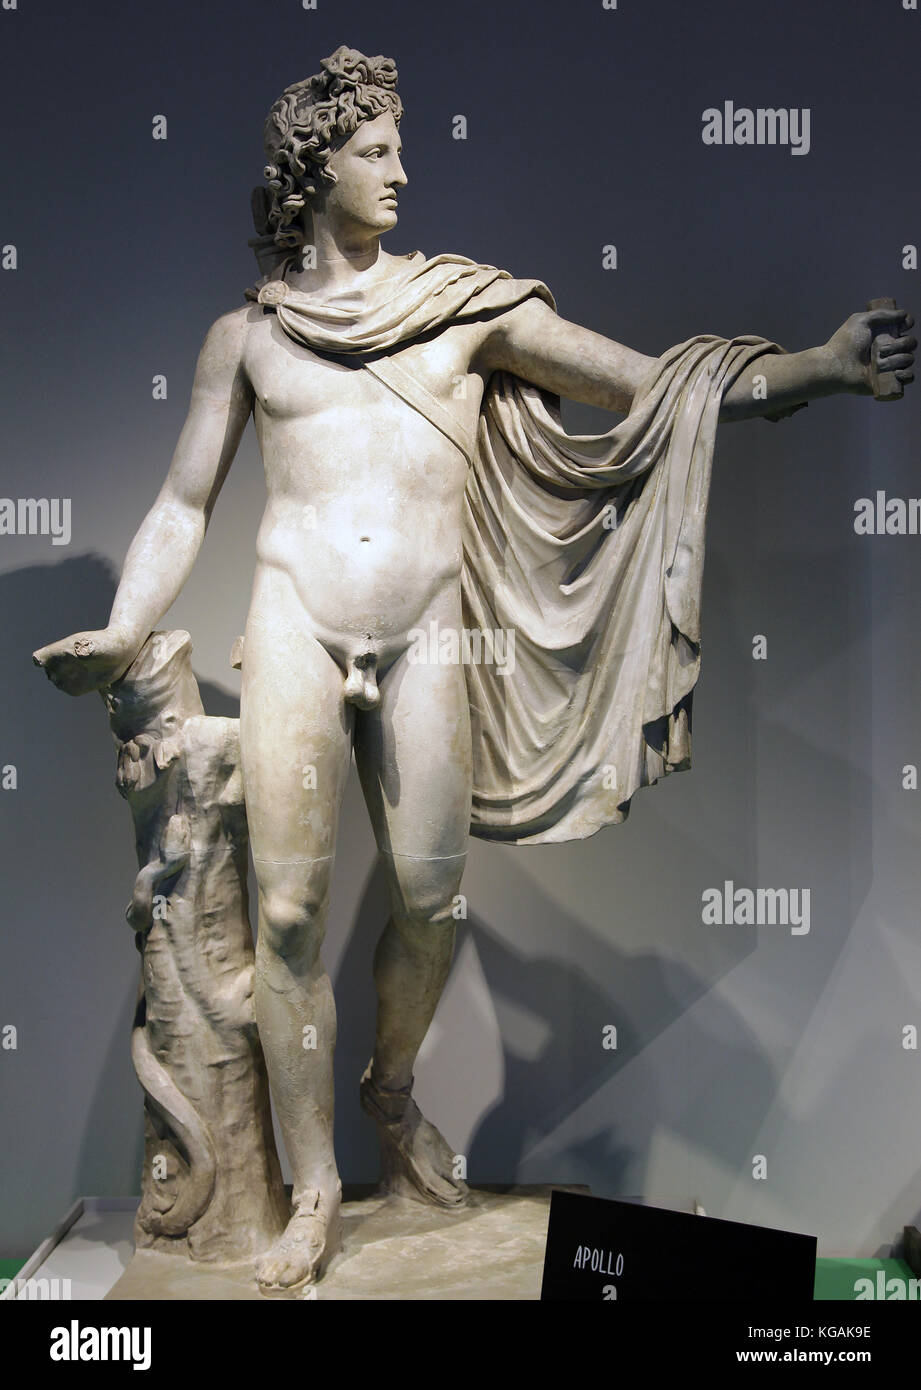 Apollo a Greek and Roman god of music healing light prophecy and enlightenment. Stock Photo